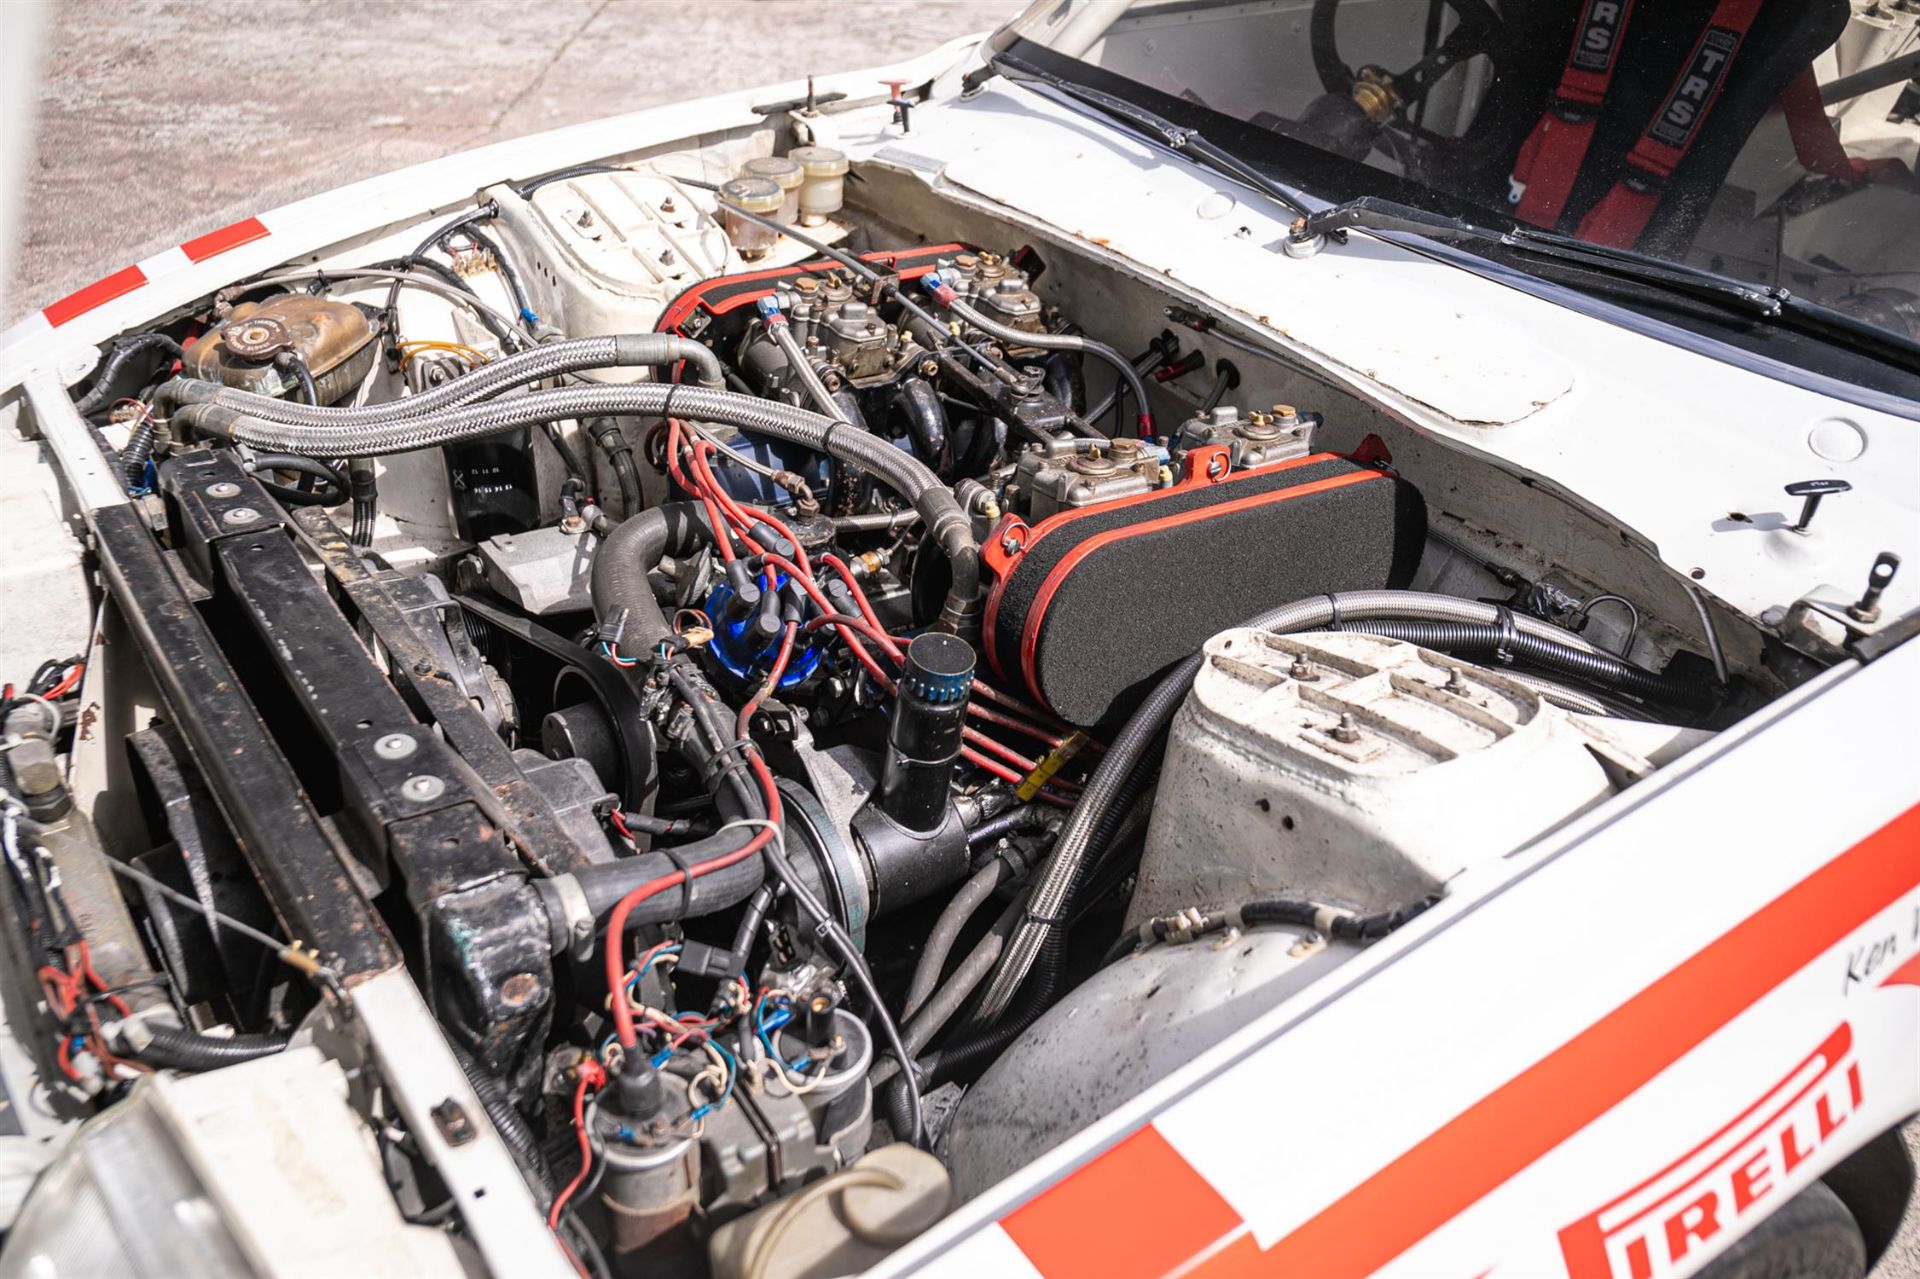 1982 Rover SD1 Vitesse 'Group A' Works Rally Car - Image 3 of 10